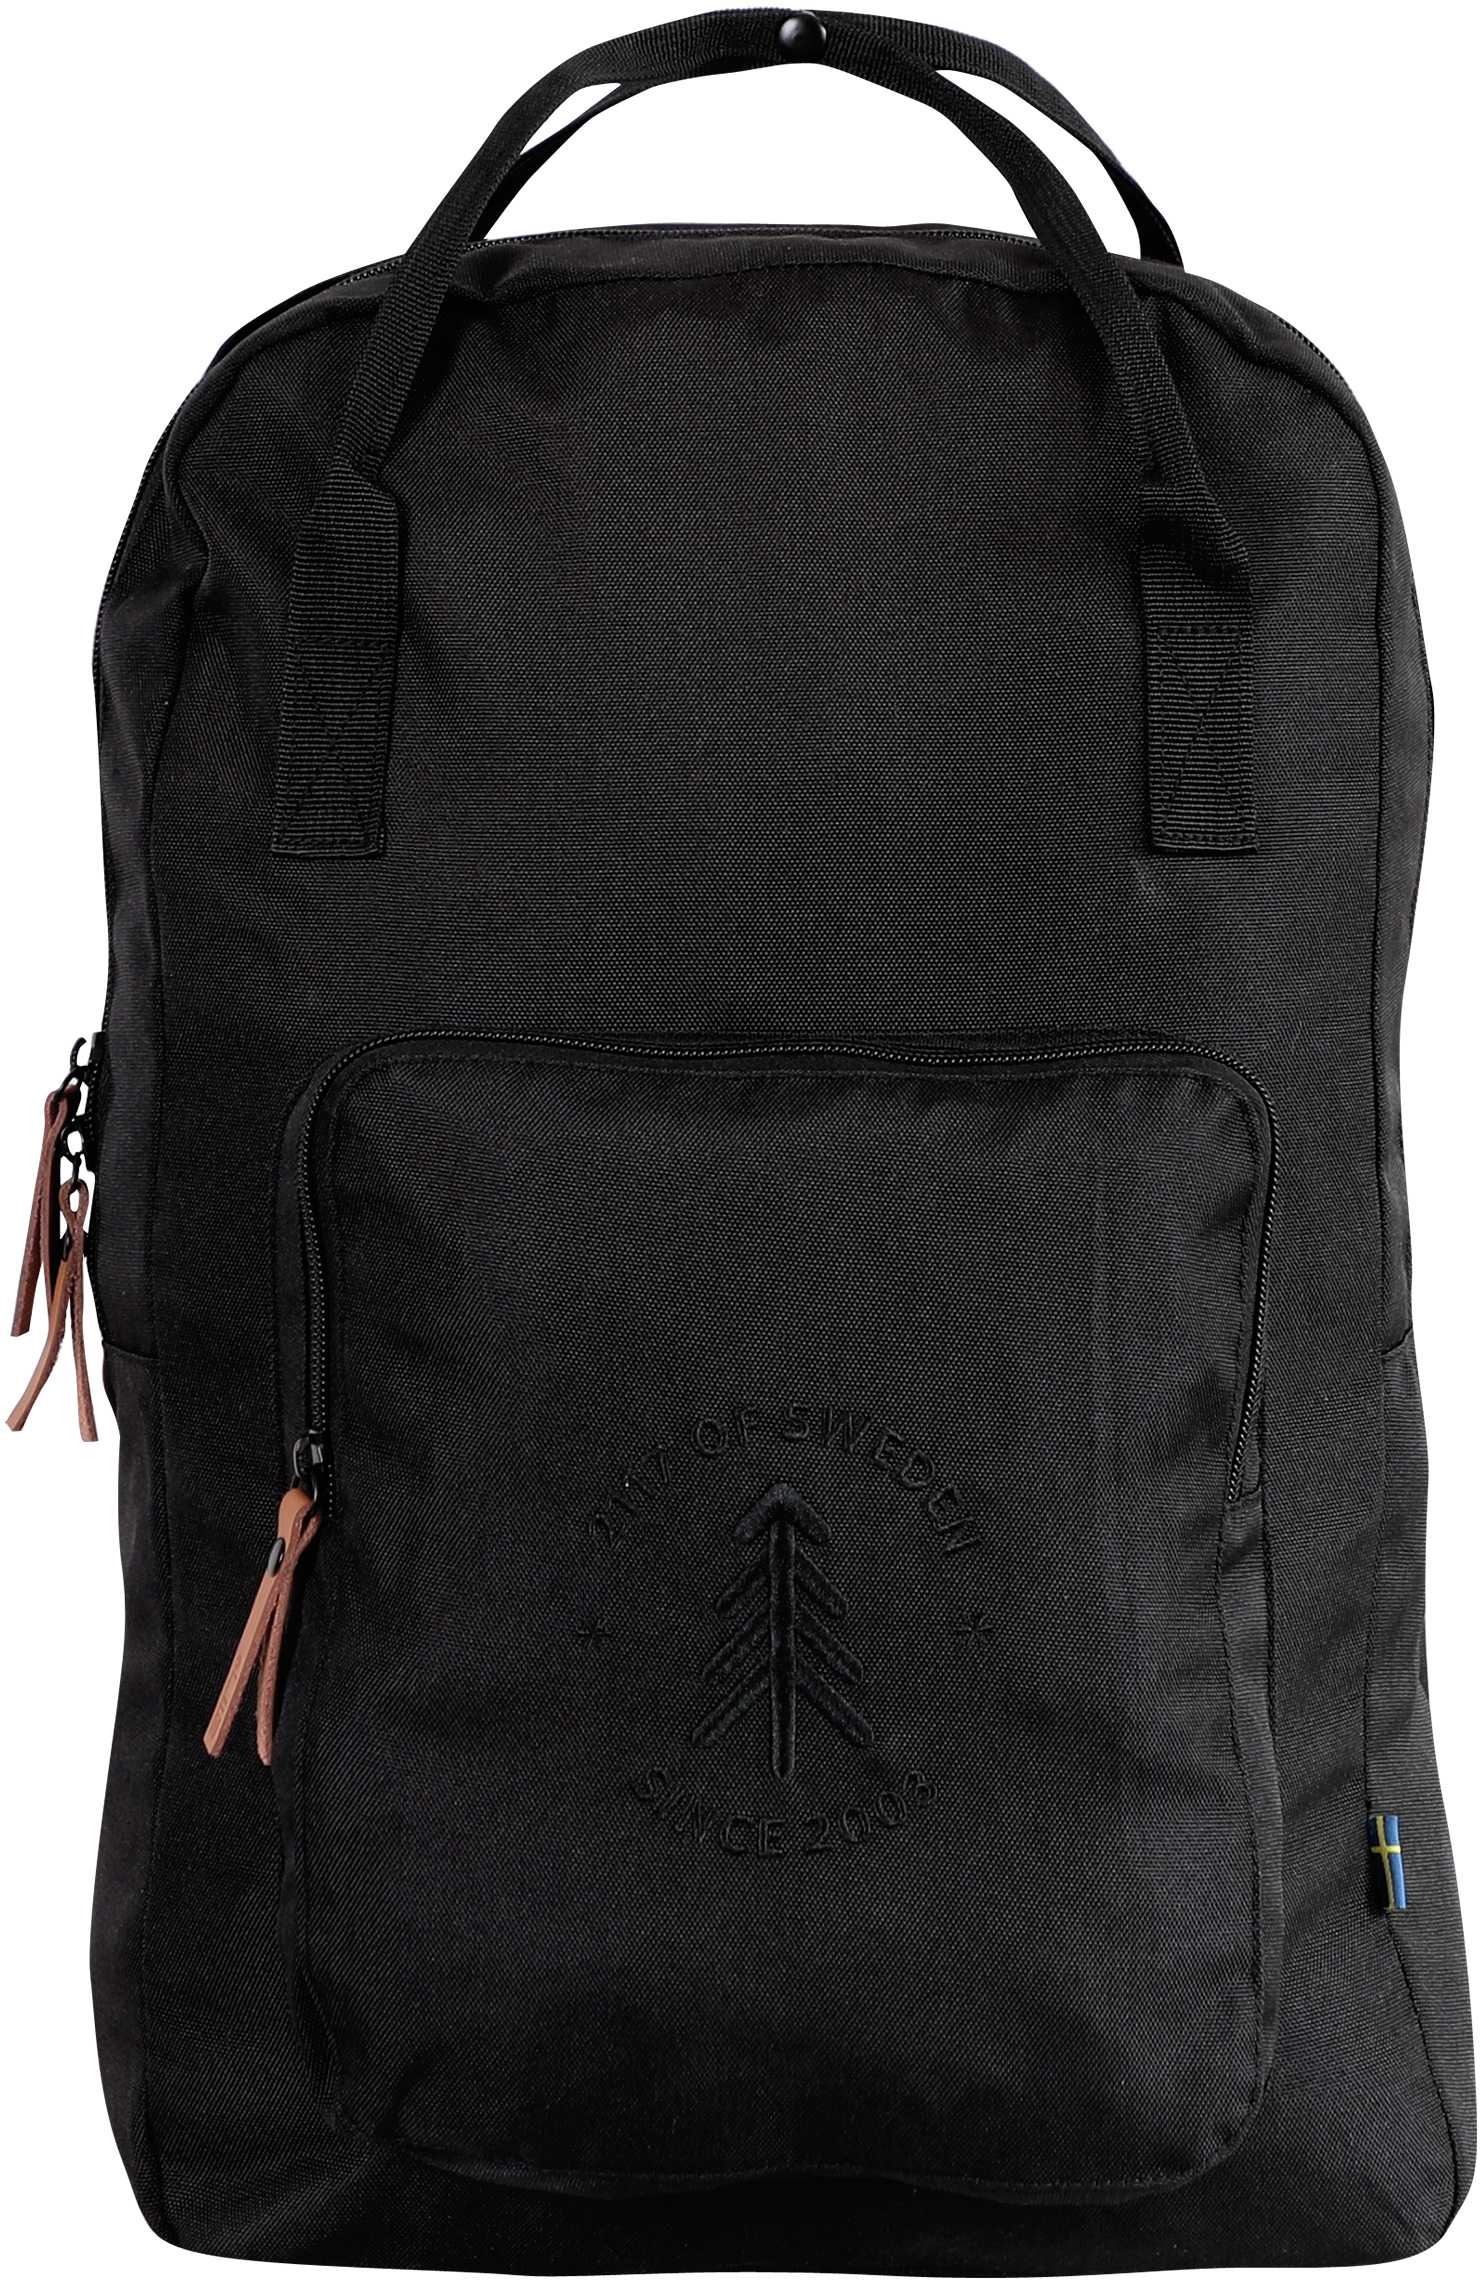 Large city backpack